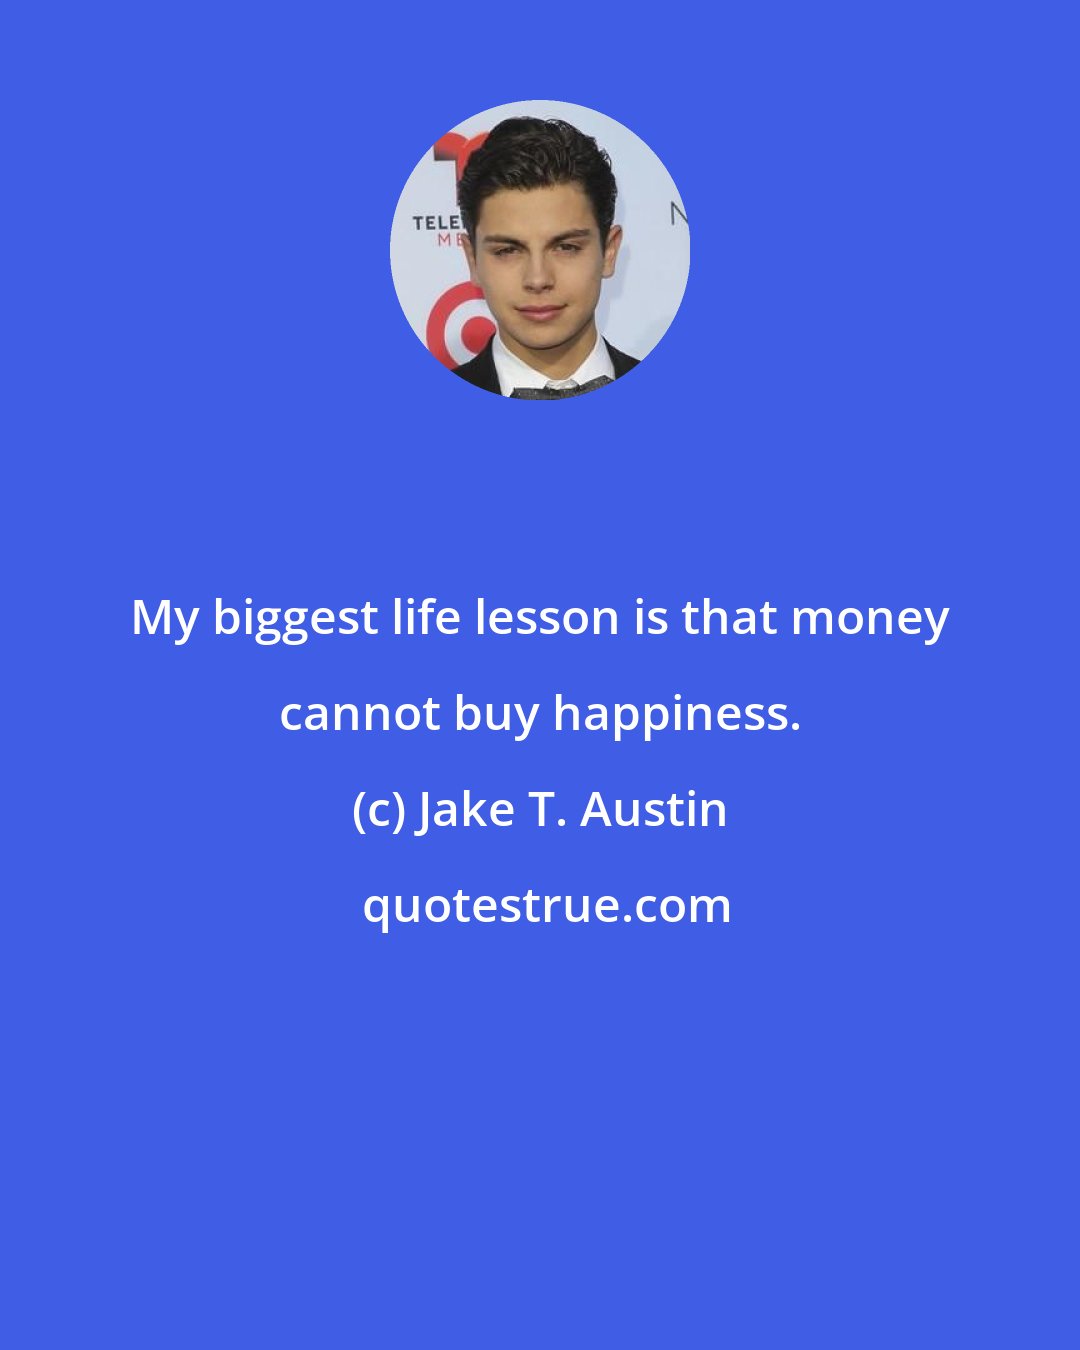 Jake T. Austin: My biggest life lesson is that money cannot buy happiness.